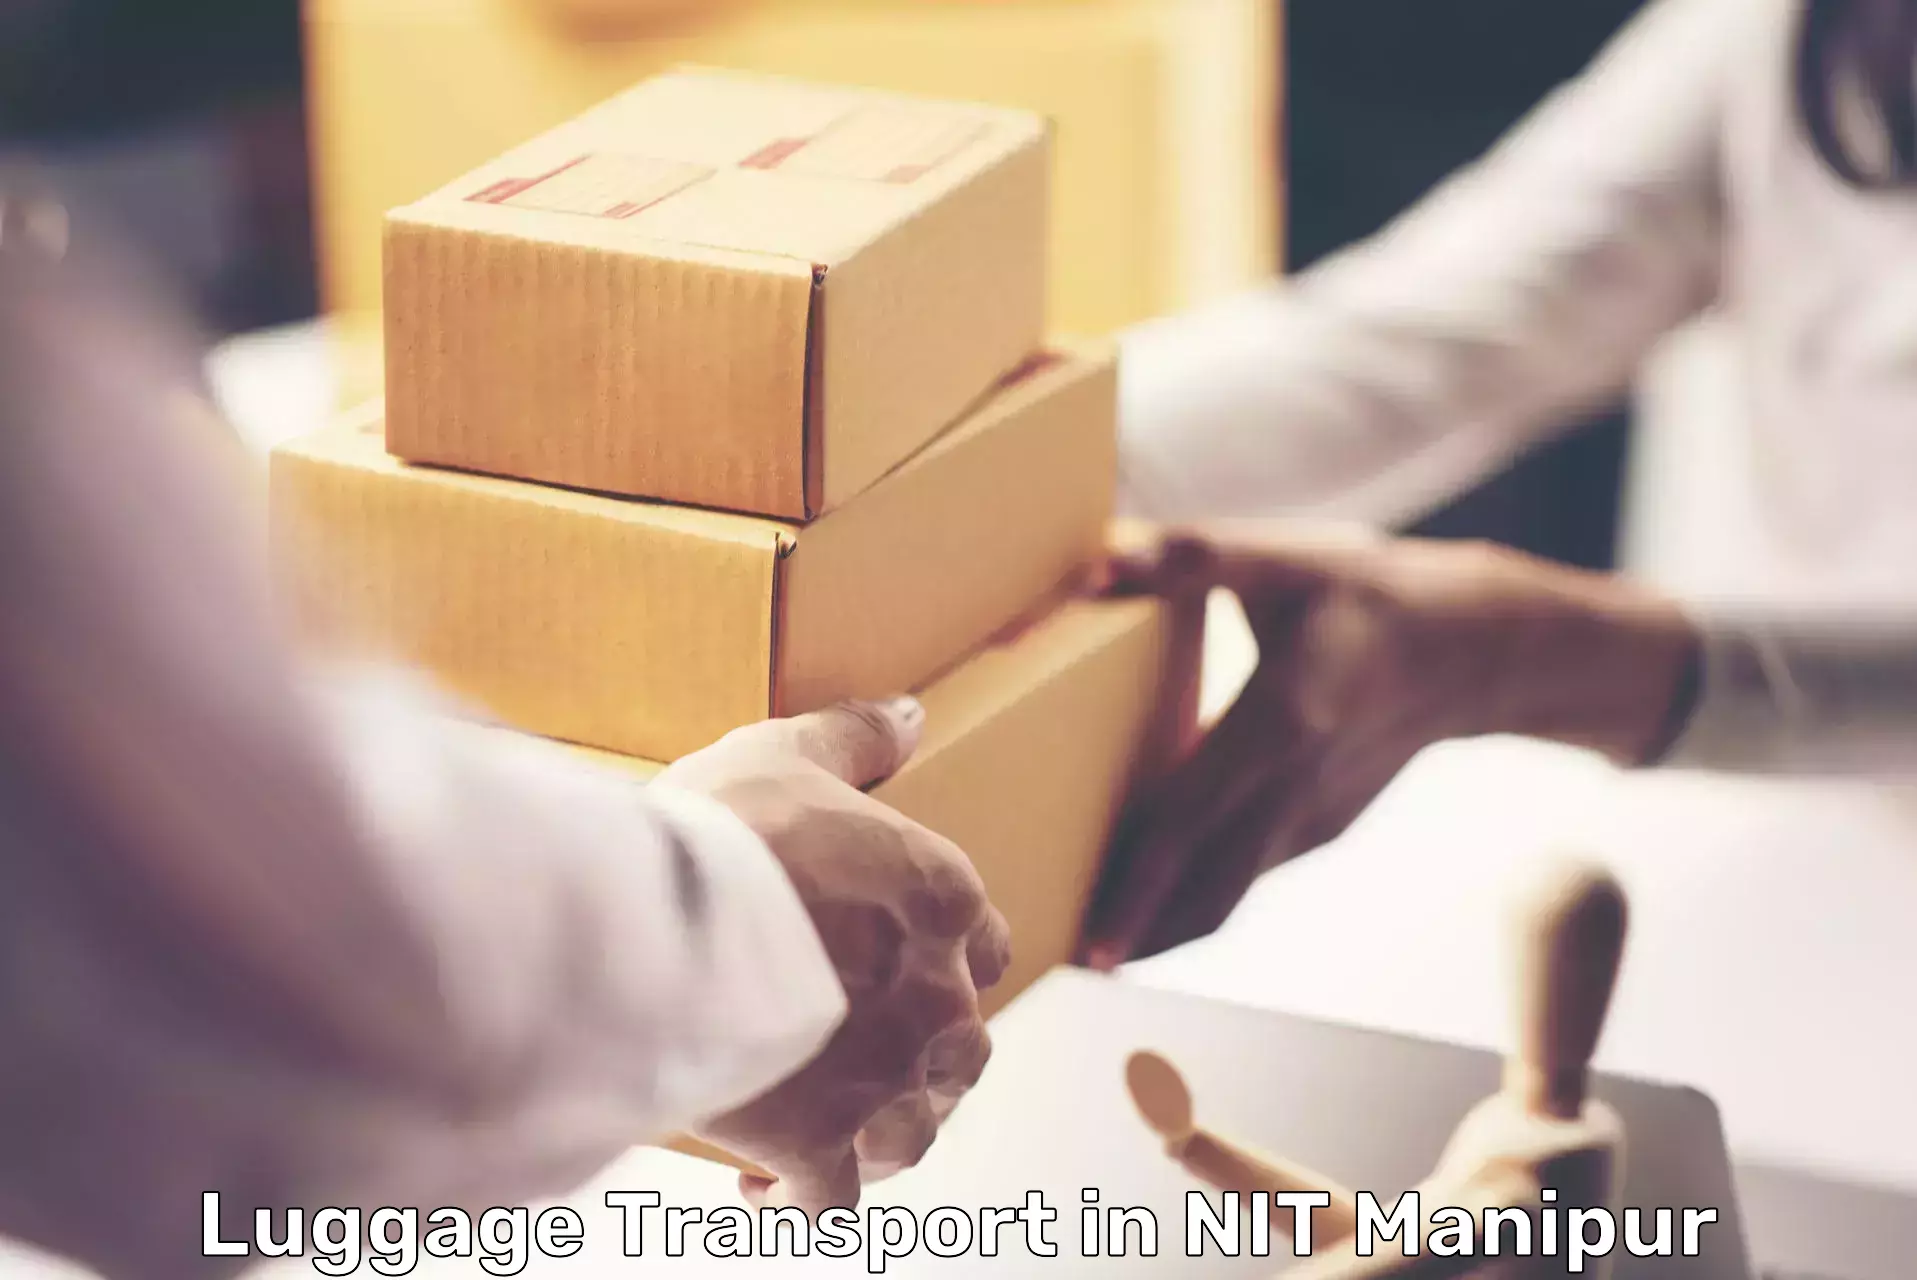 Luggage shipment specialists in NIT Manipur